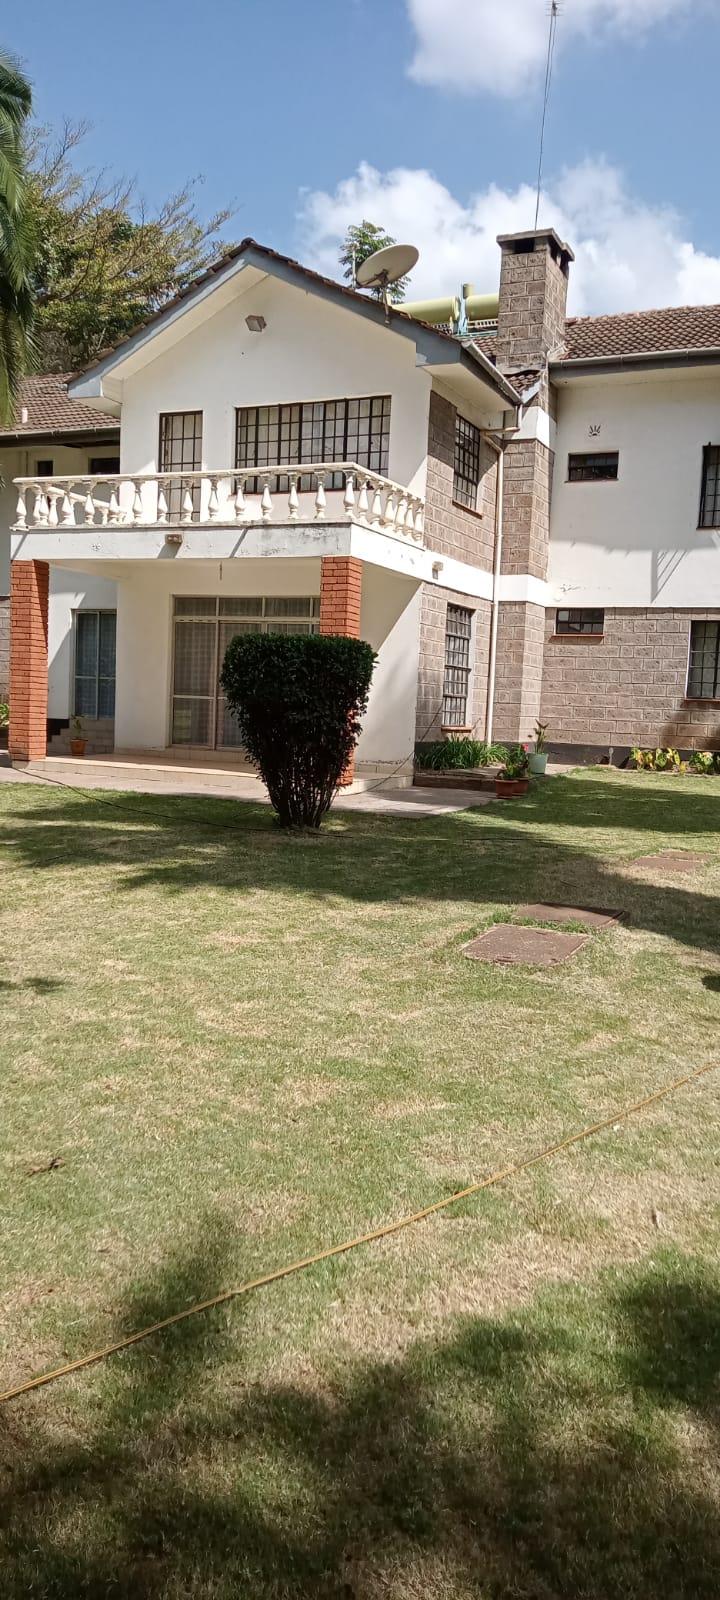 4 Bedroom Double Storey House to Let at Ksh600k Sitting on 34acres with Huge Family Room, Tv Room, Study Room, Terrace, Mature and Well-Kept Garden and more amenities (2)